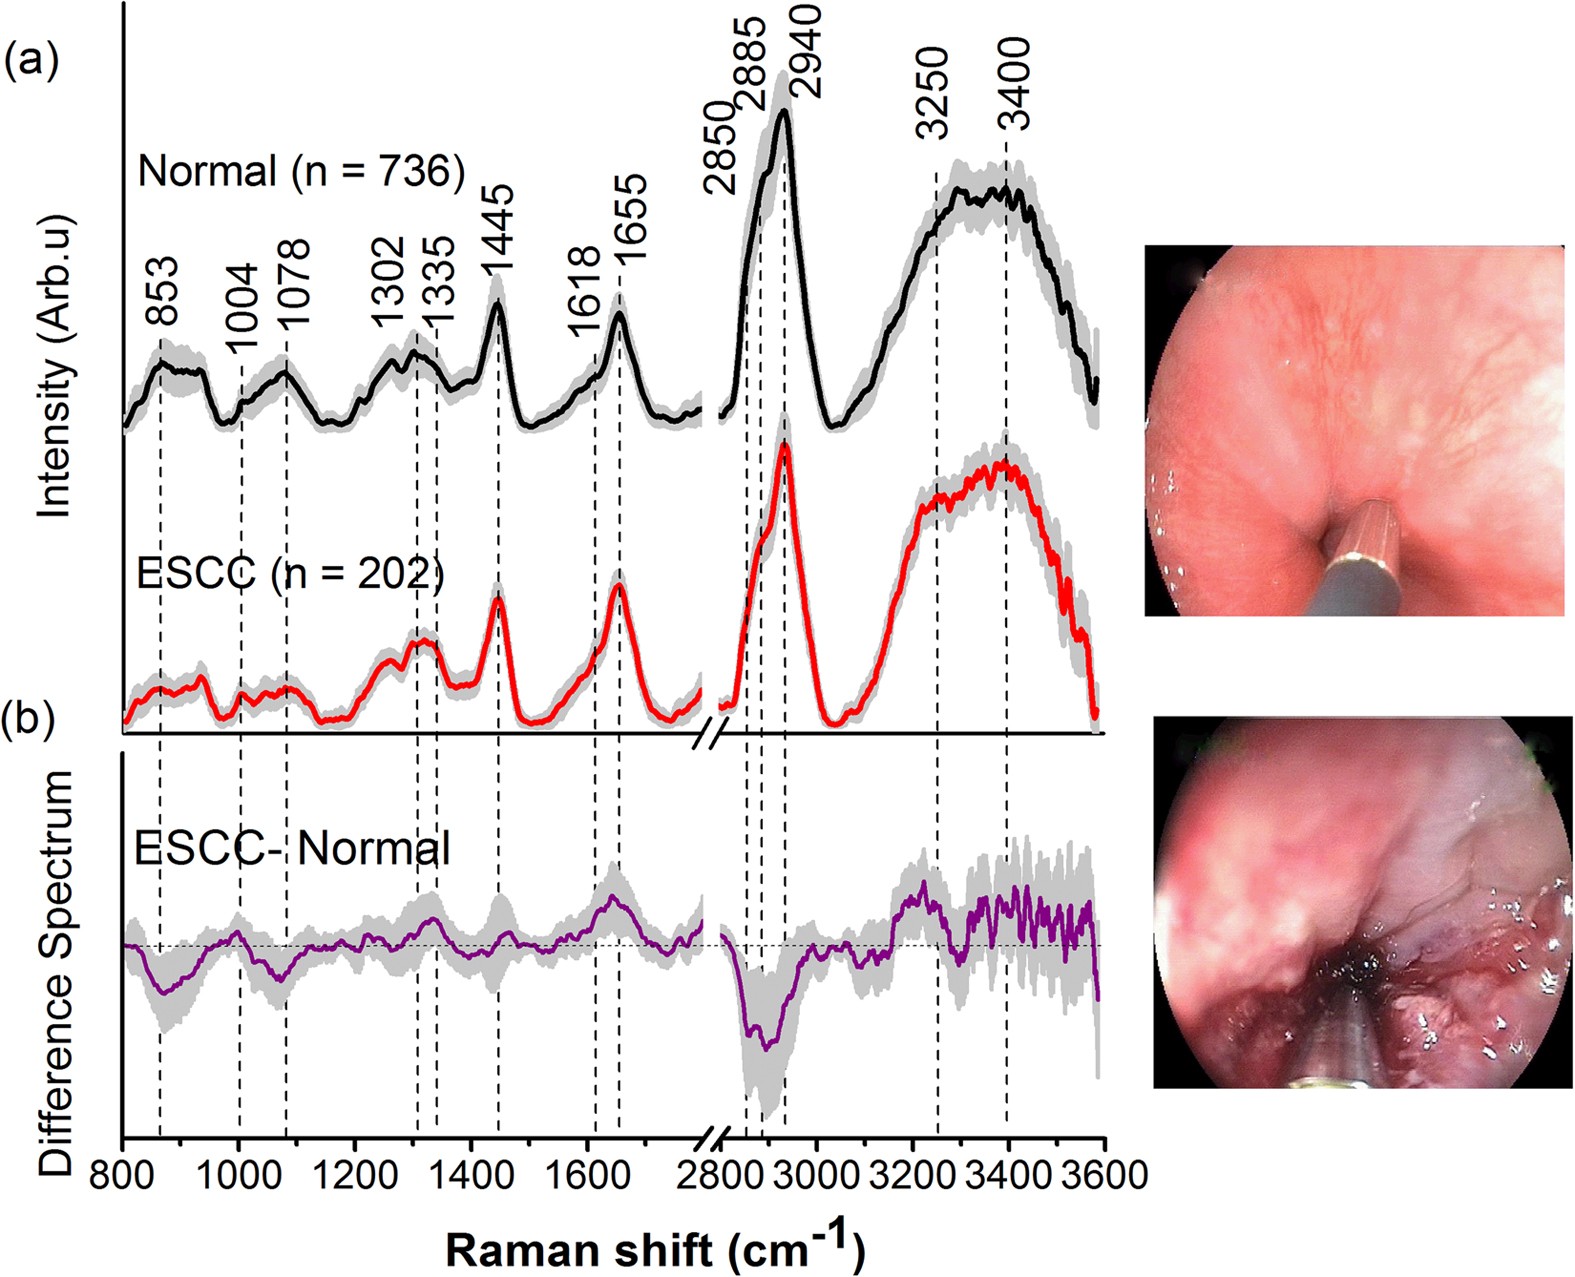 Simultaneous fingerprint and high-wavenumber fiber-optic Raman spectroscopy  improves in vivo diagnosis of esophageal squamous cell carcinoma at  endoscopy | Scientific Reports